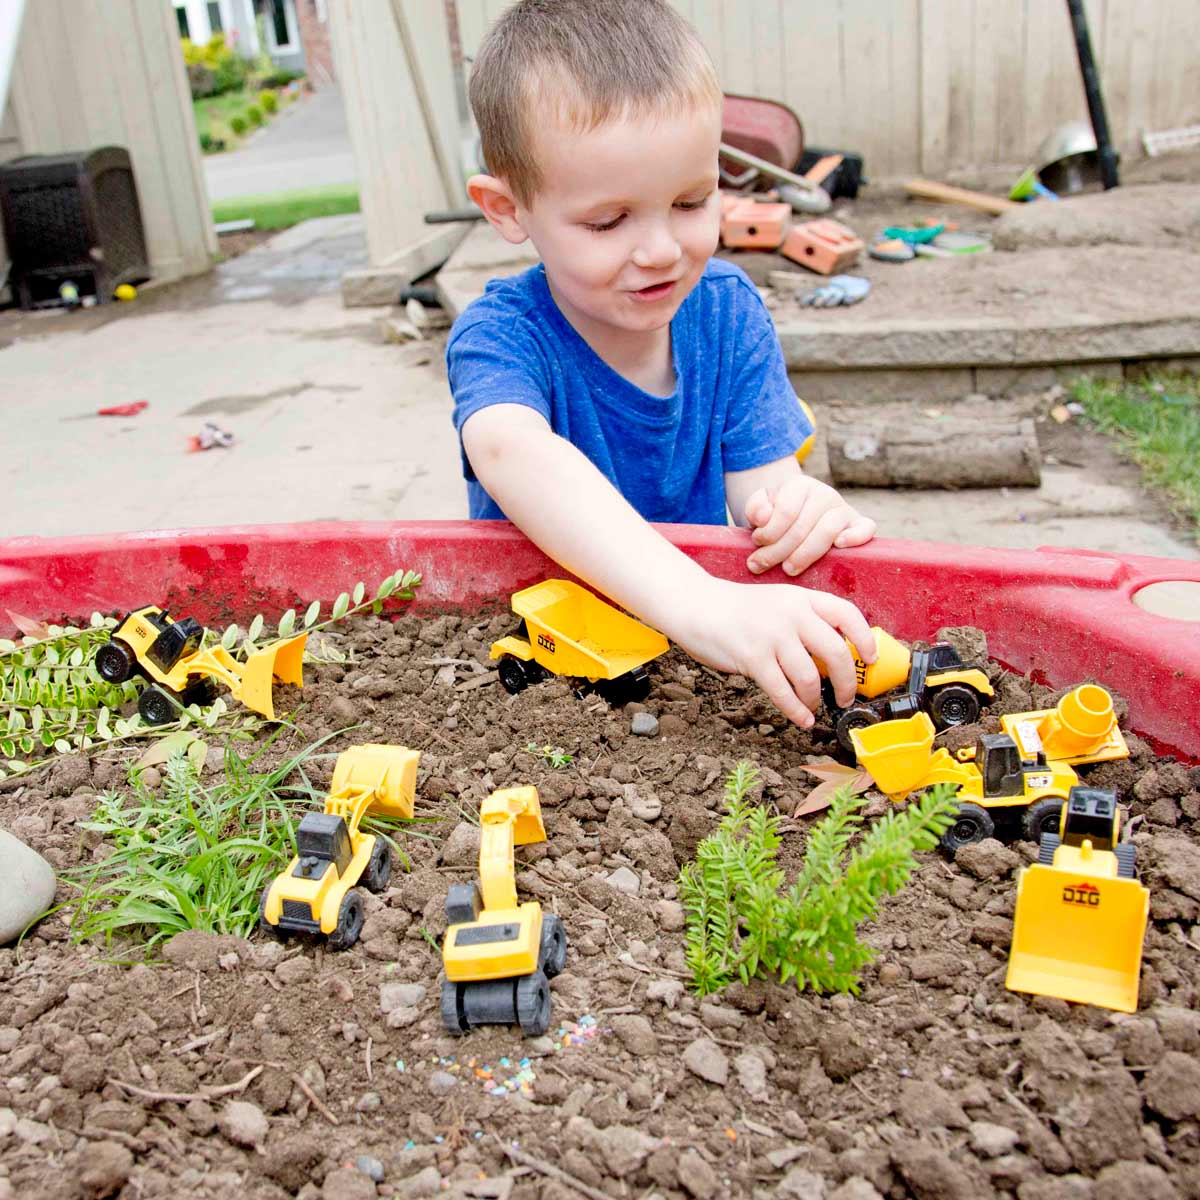 A child in a blue shirt moves construction trucks around a sensory bin full of dirt and yard trimmings.